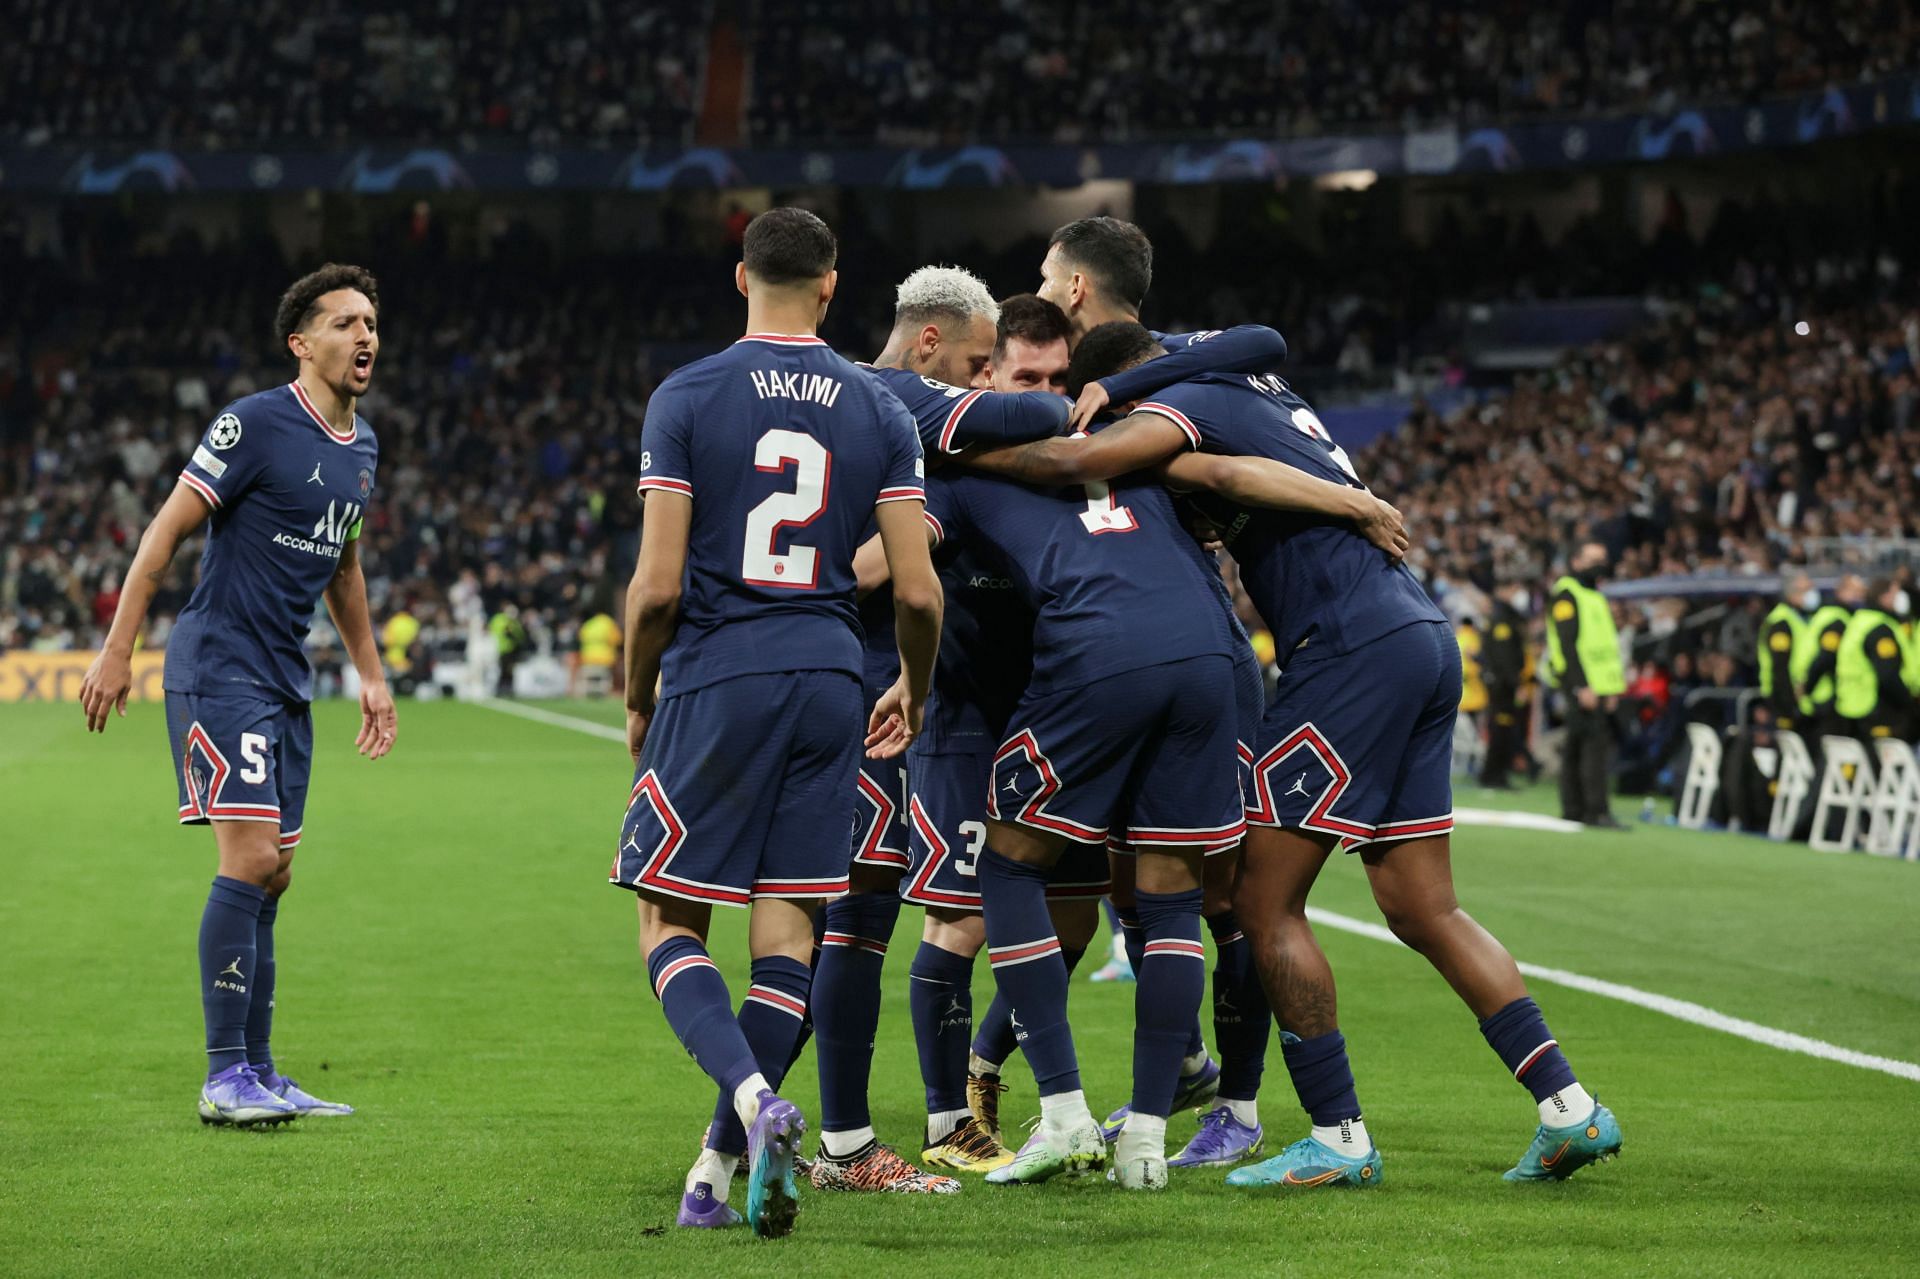 PSG take on Angers in Ligue 1 this week